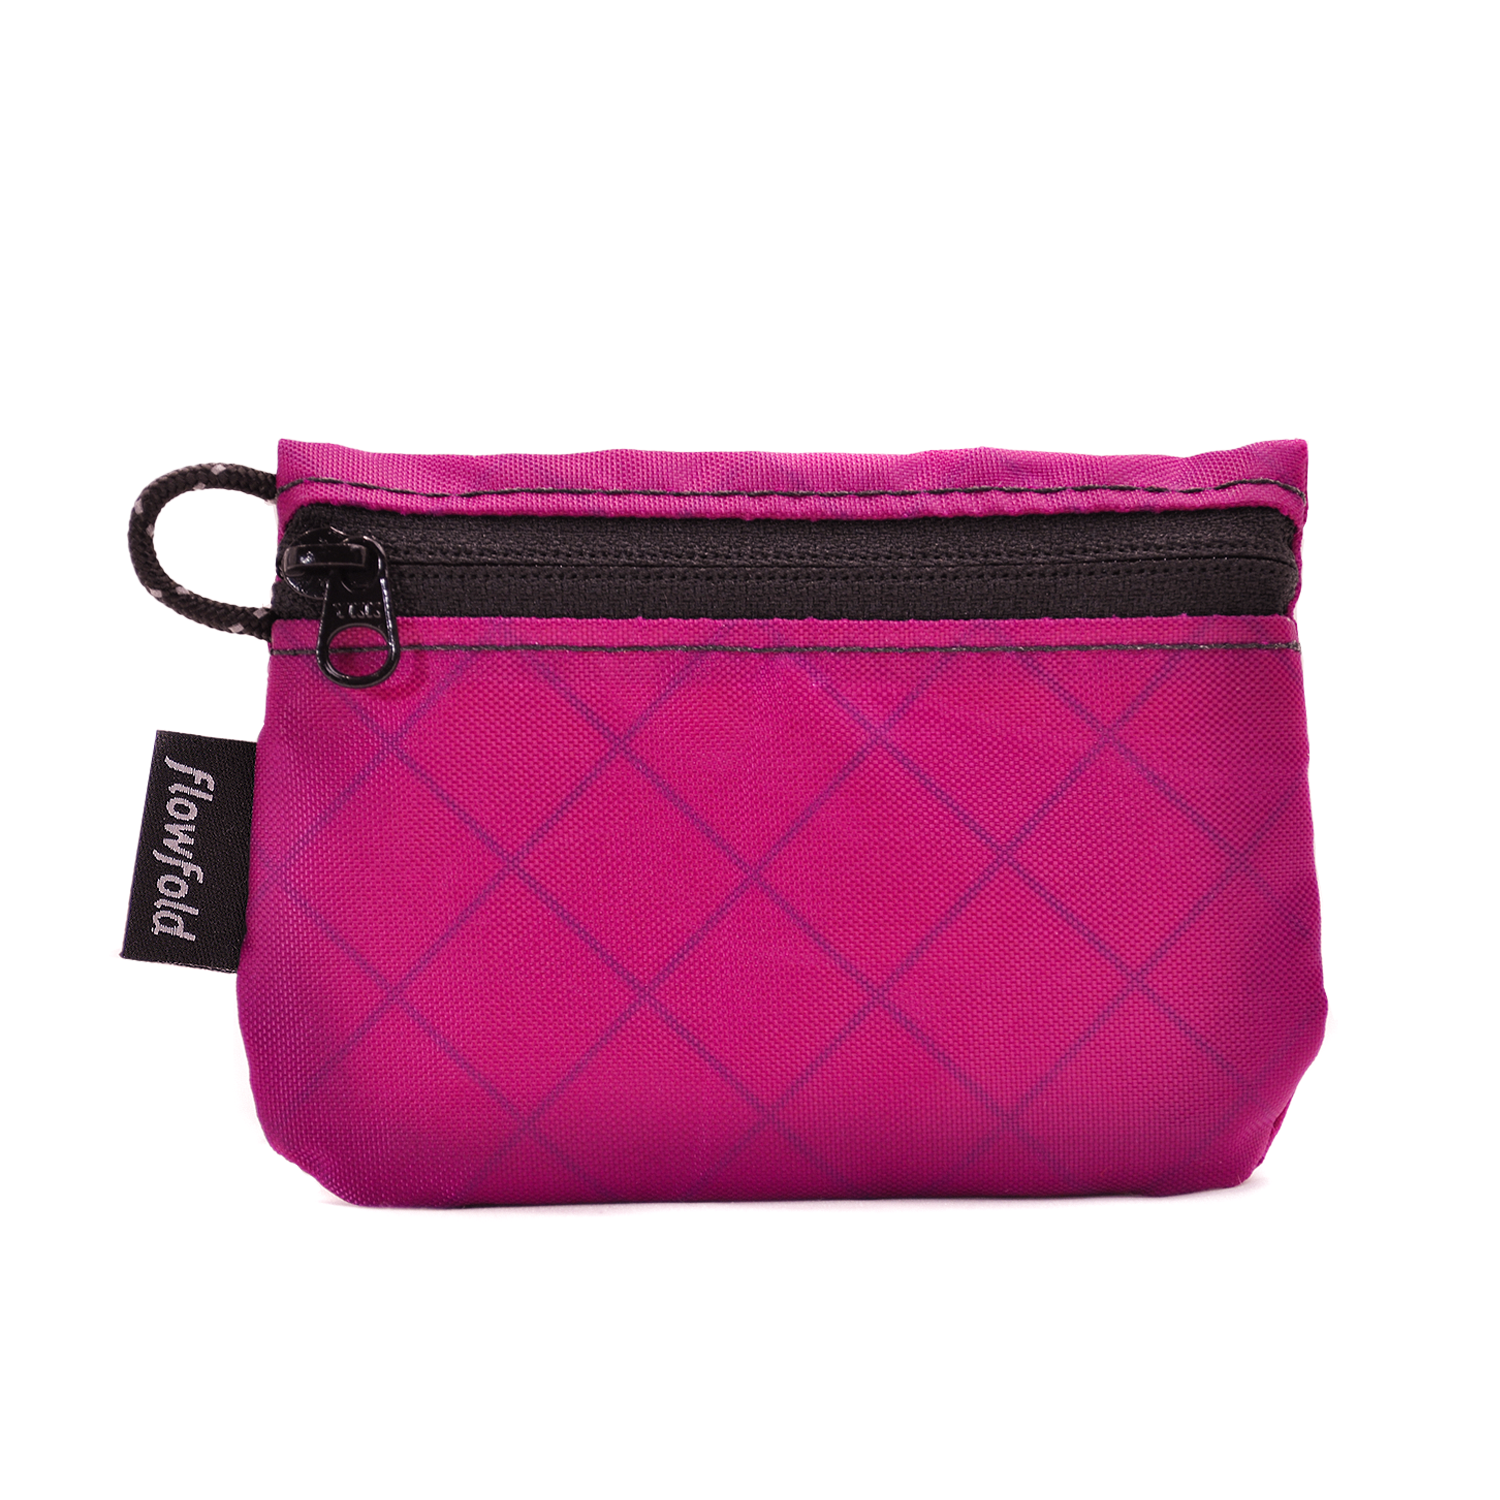 Flowfold Magenta Essentialist Coin Pouch Wallet For Cash, Cards, and Coins Made in USA, Maine by Flowfold